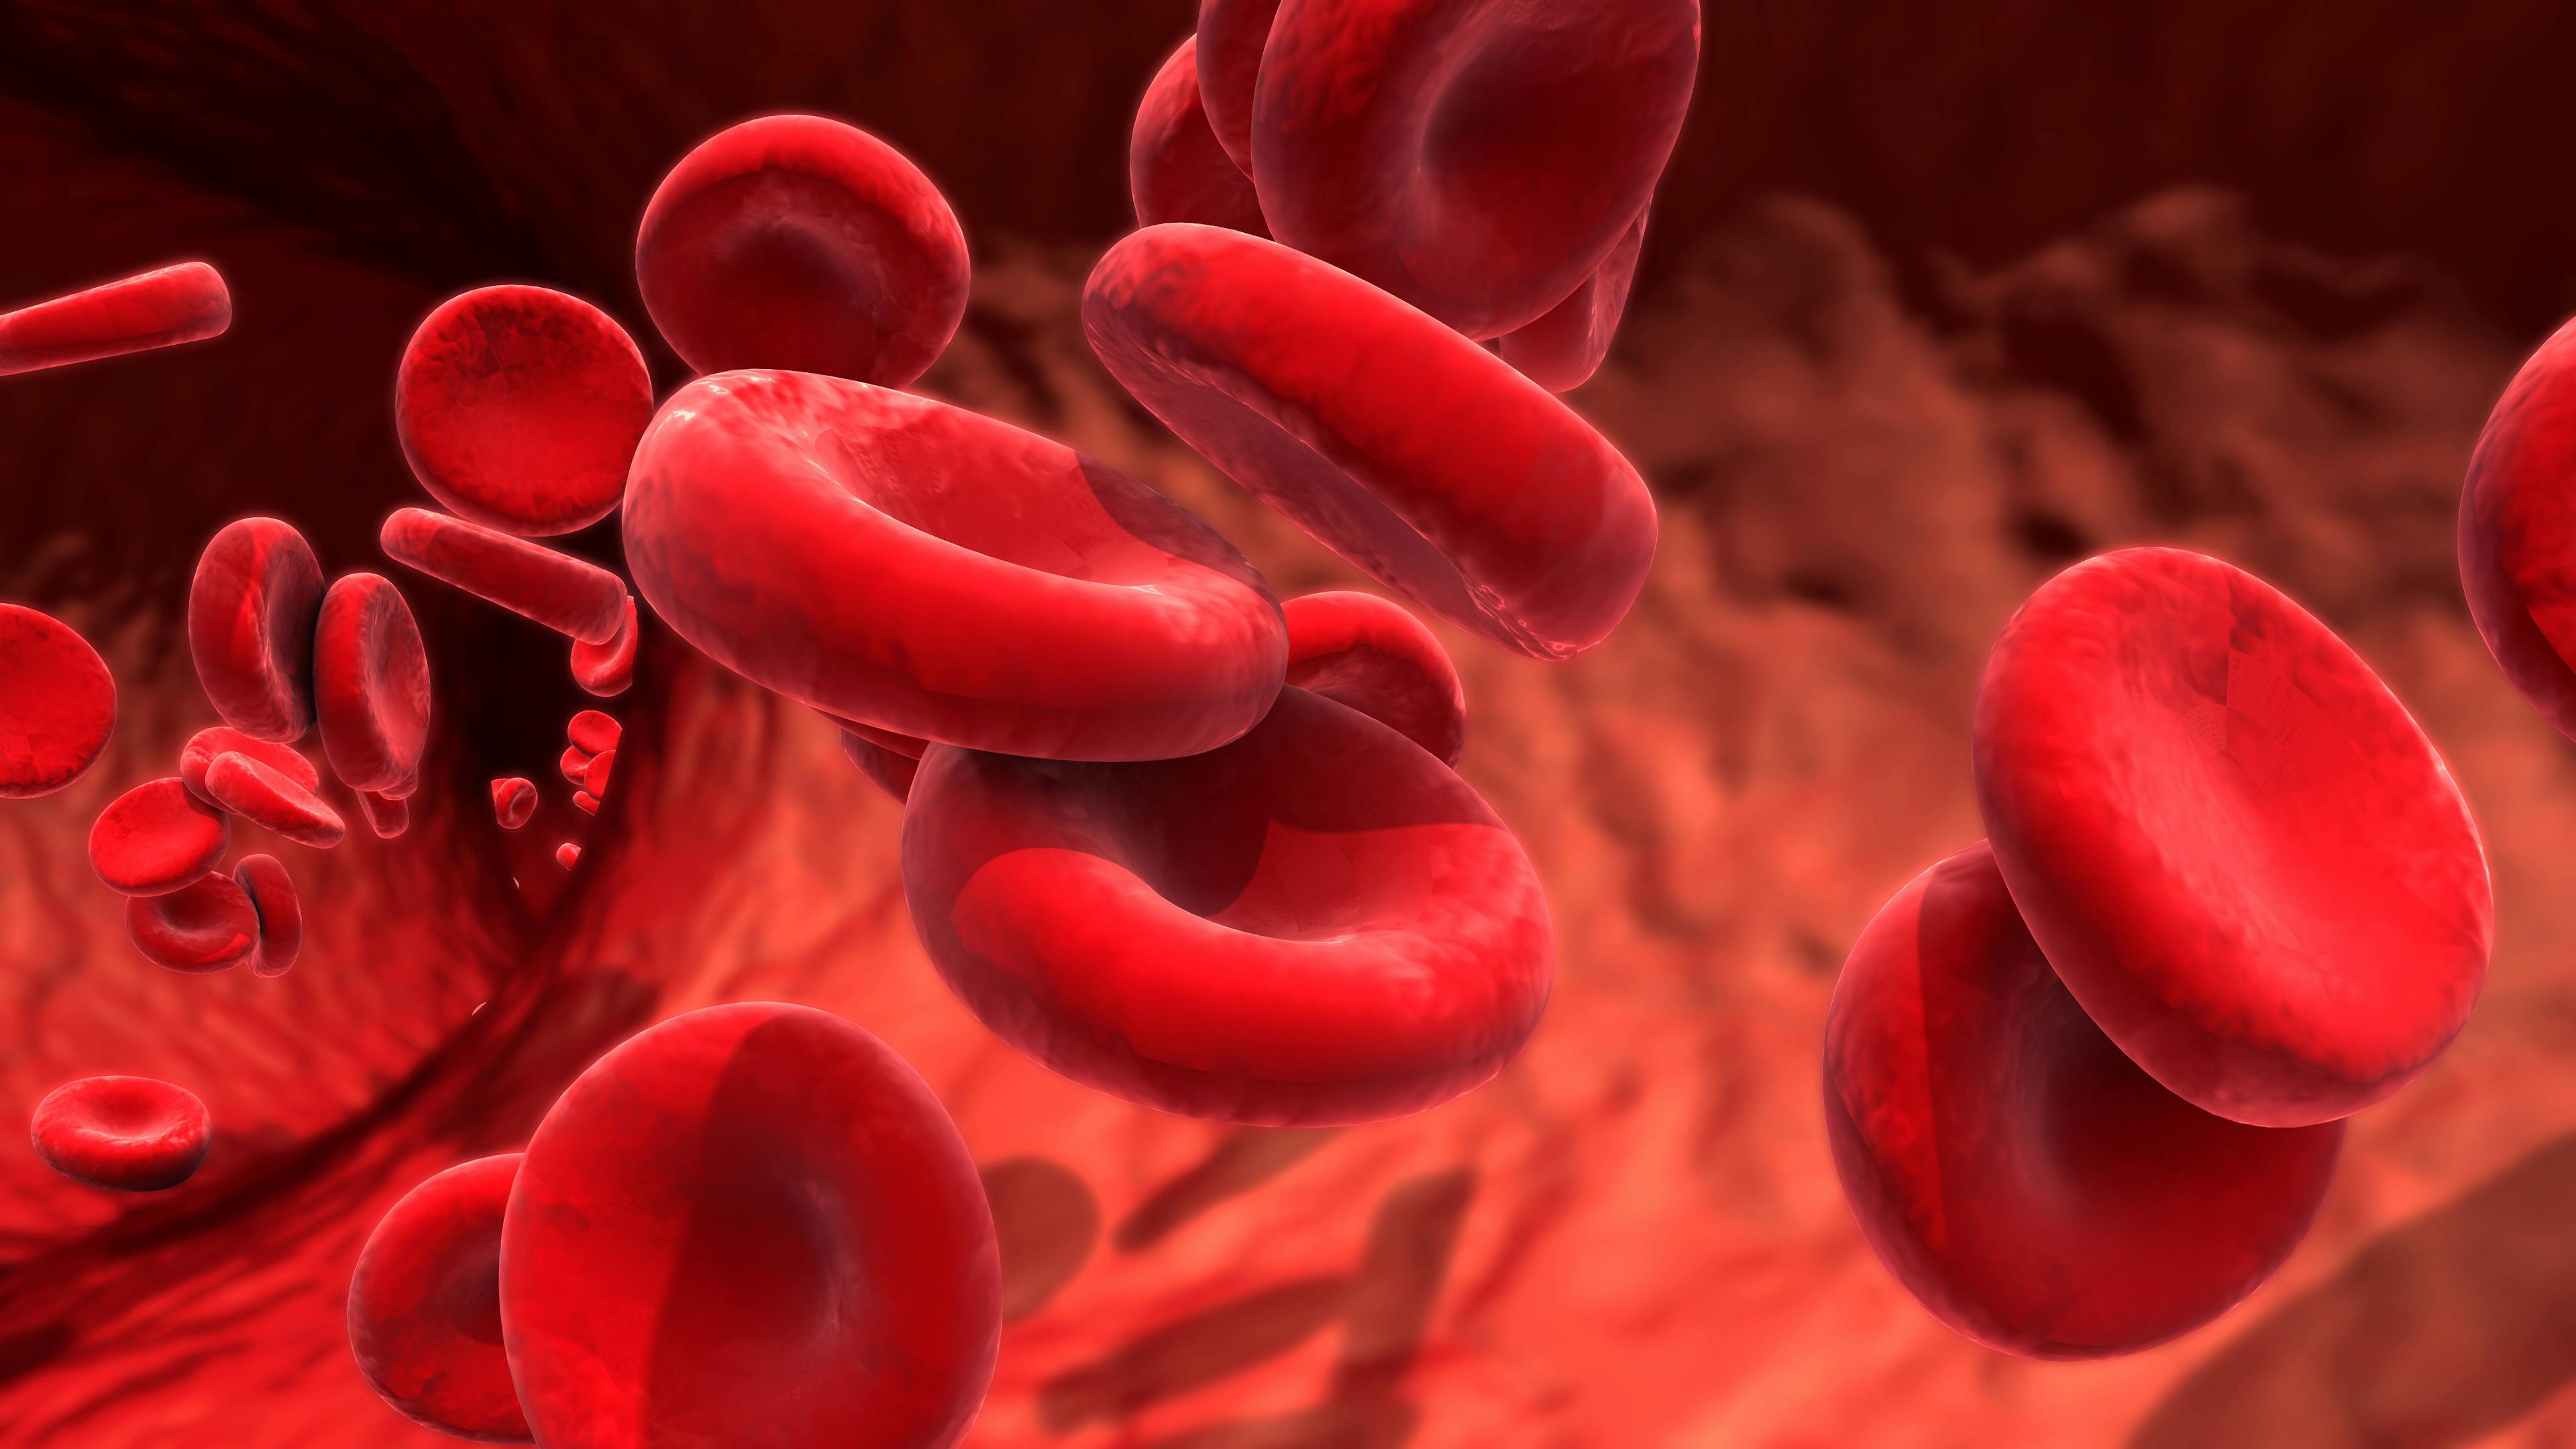 Hemoglobin Could be a Biomarker in COPD